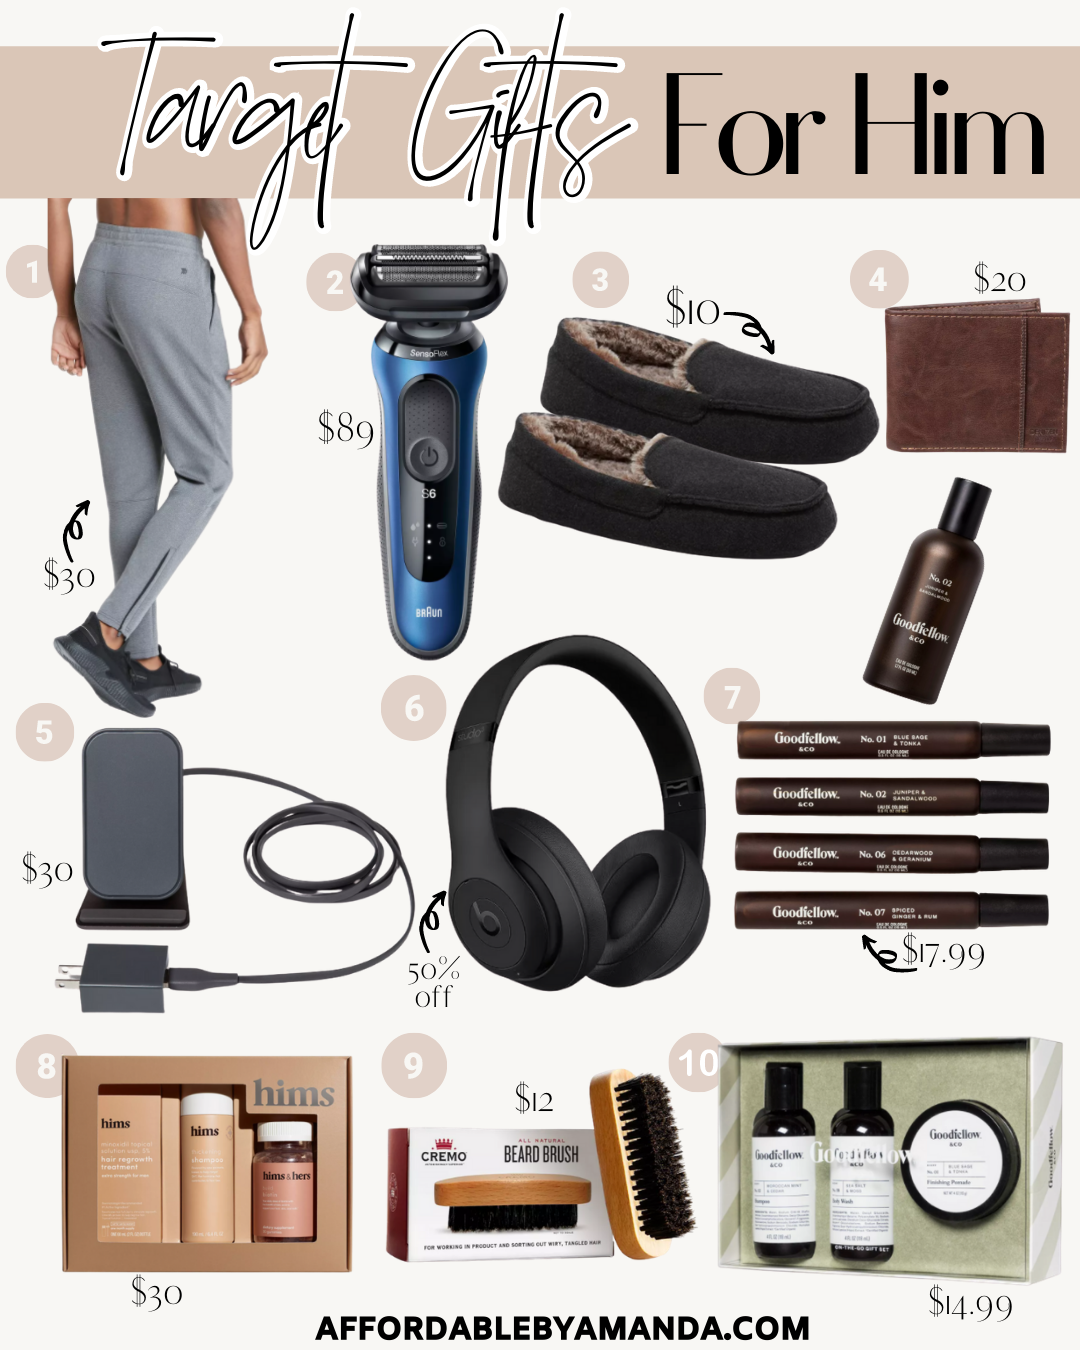 Gift Ideas for Him (guys, dads, boyfriends, brothers, or just men) - Love &  Sweet Tea